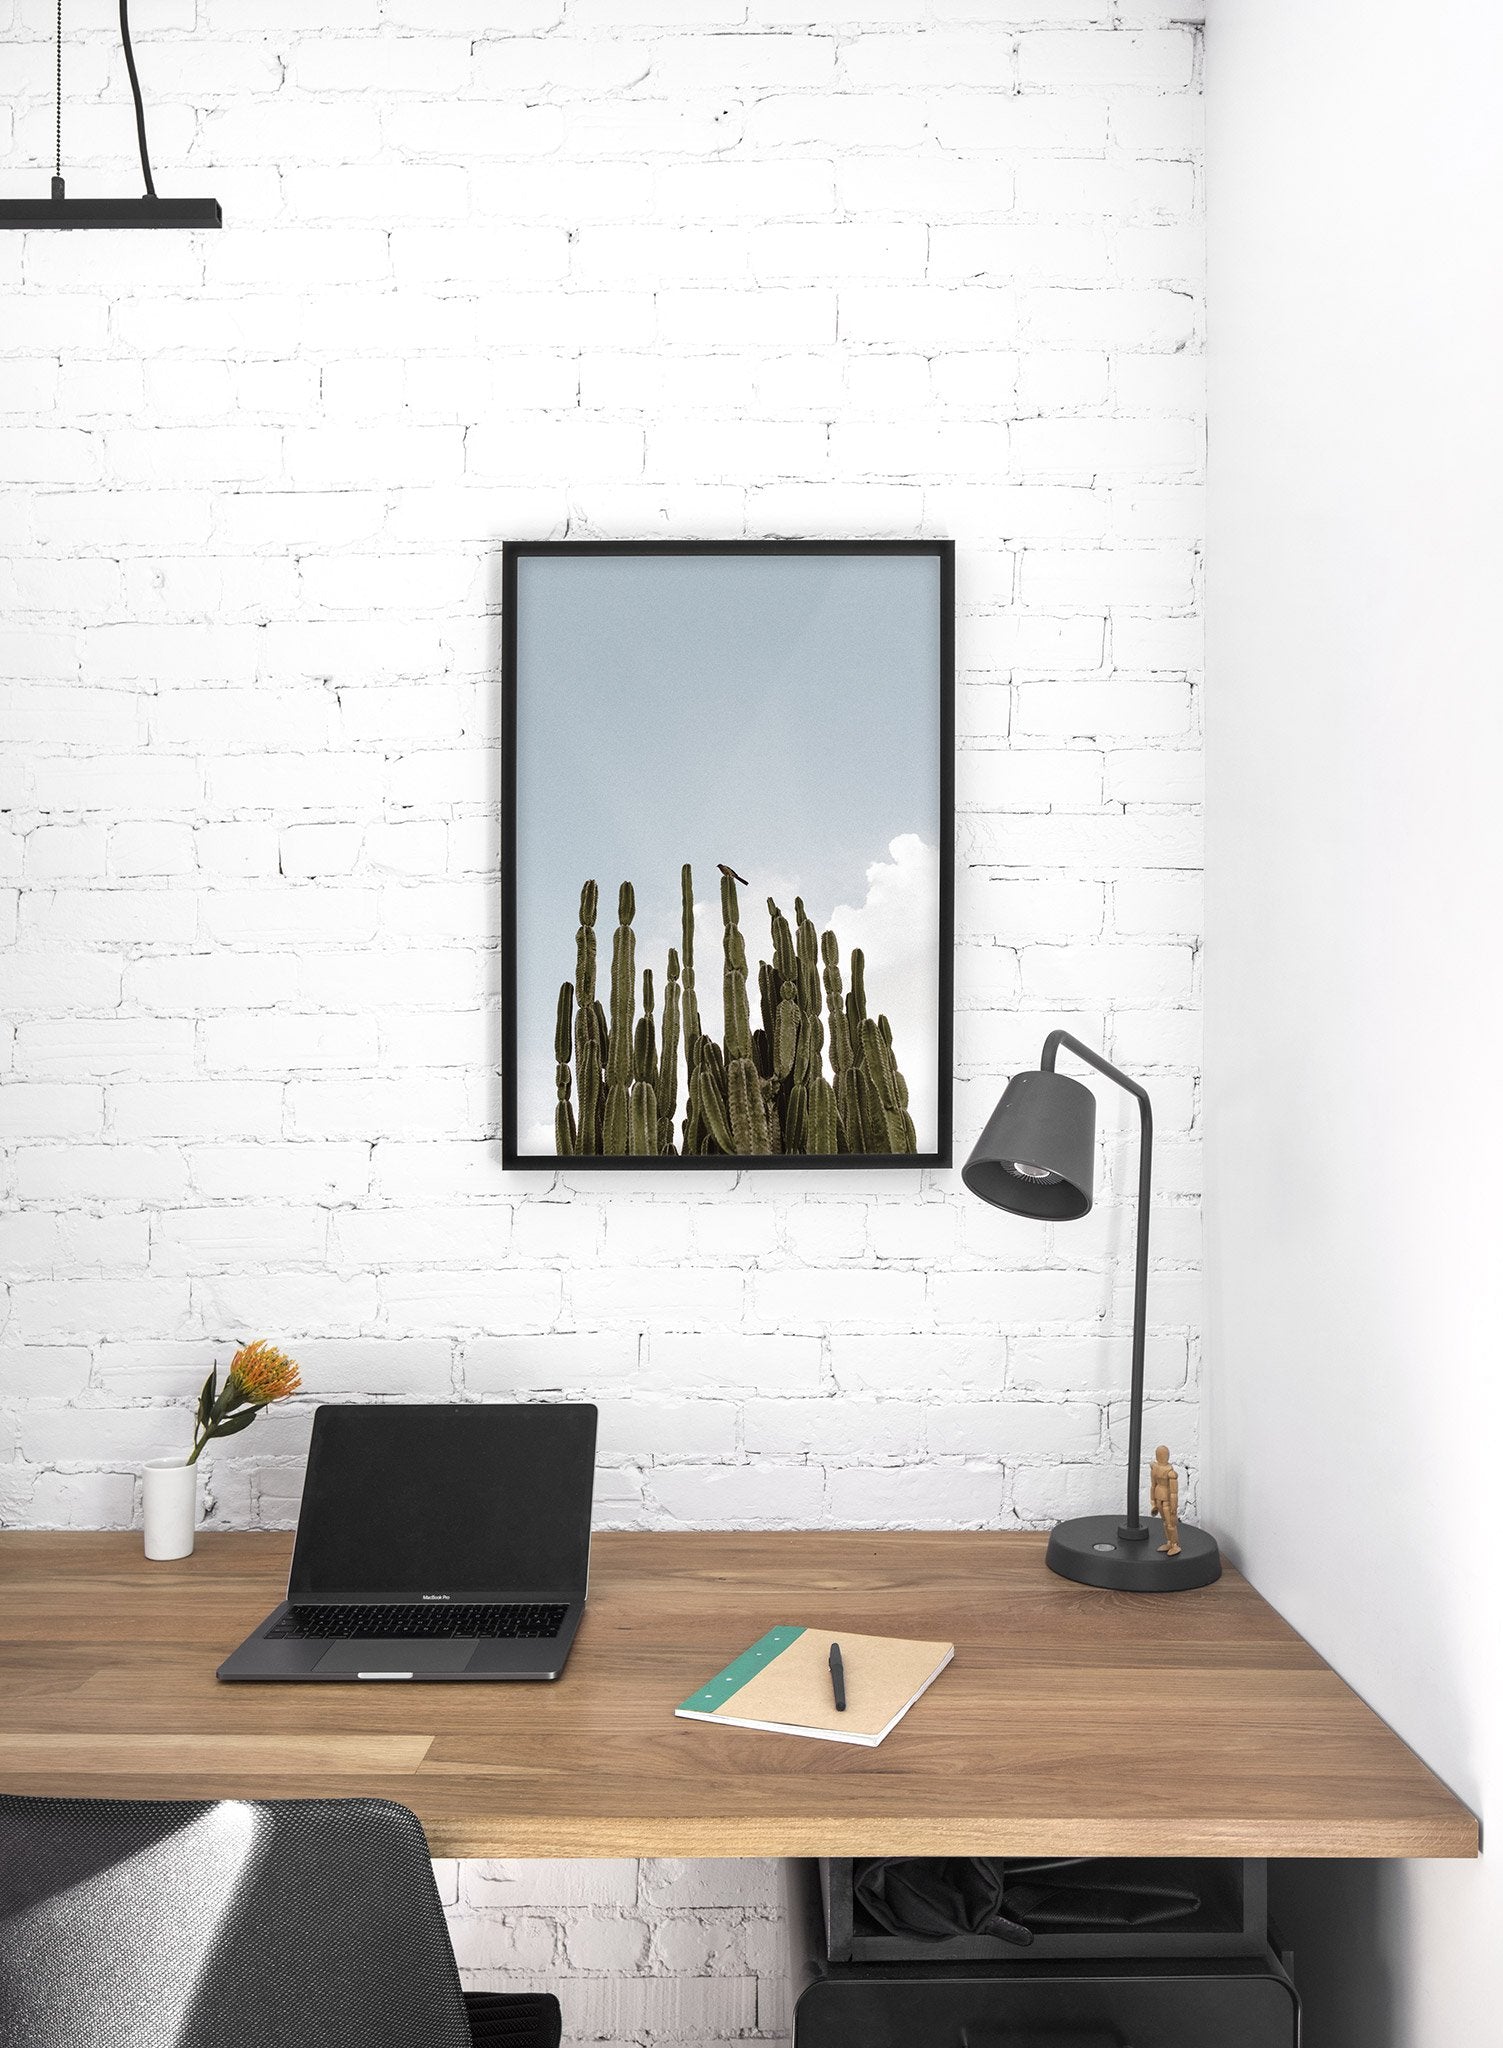 Modern minimalist photography by Opposite Wall with cactus plant against blue sky - Lifestyle - Office Desk